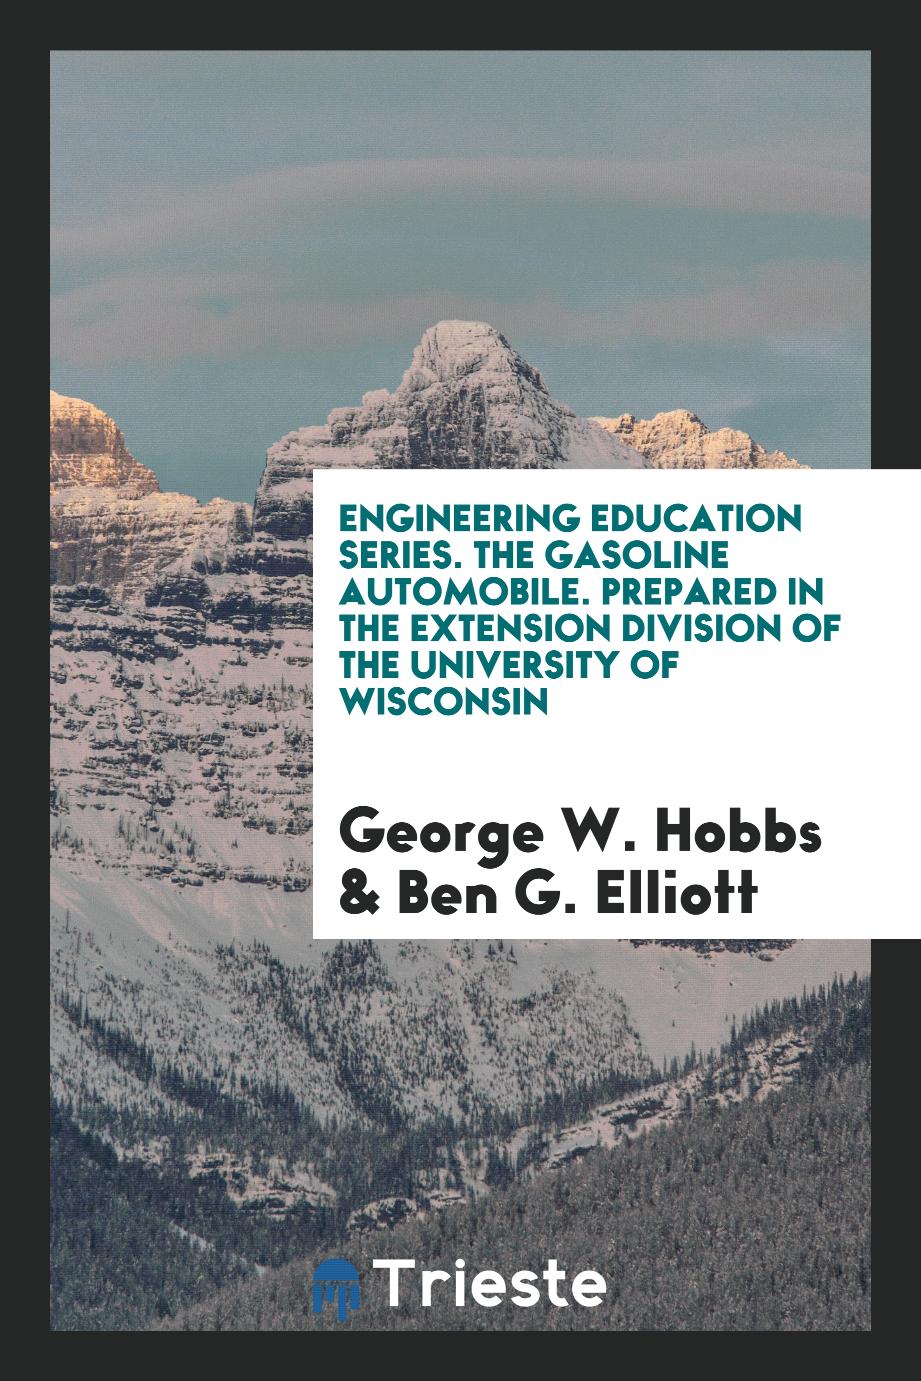 Engineering Education Series. The Gasoline Automobile. Prepared in the Extension Division of the University of Wisconsin